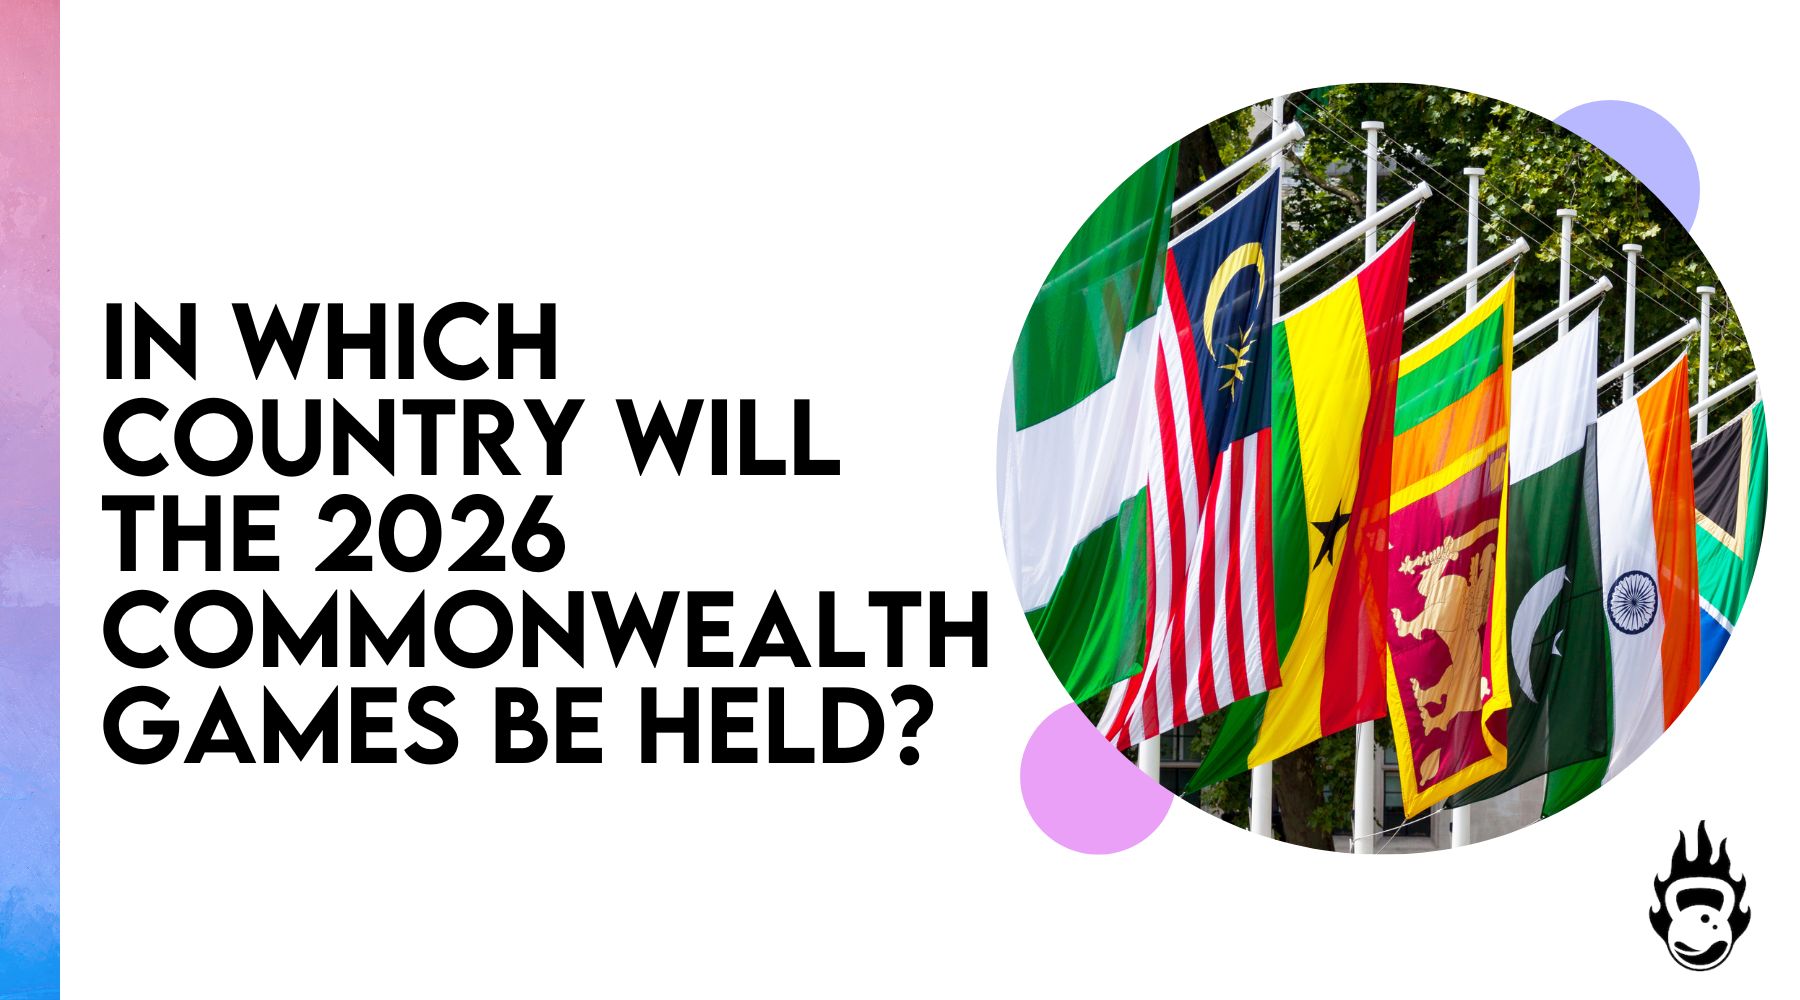 In which country will the 2026 Commonwealth Games be held